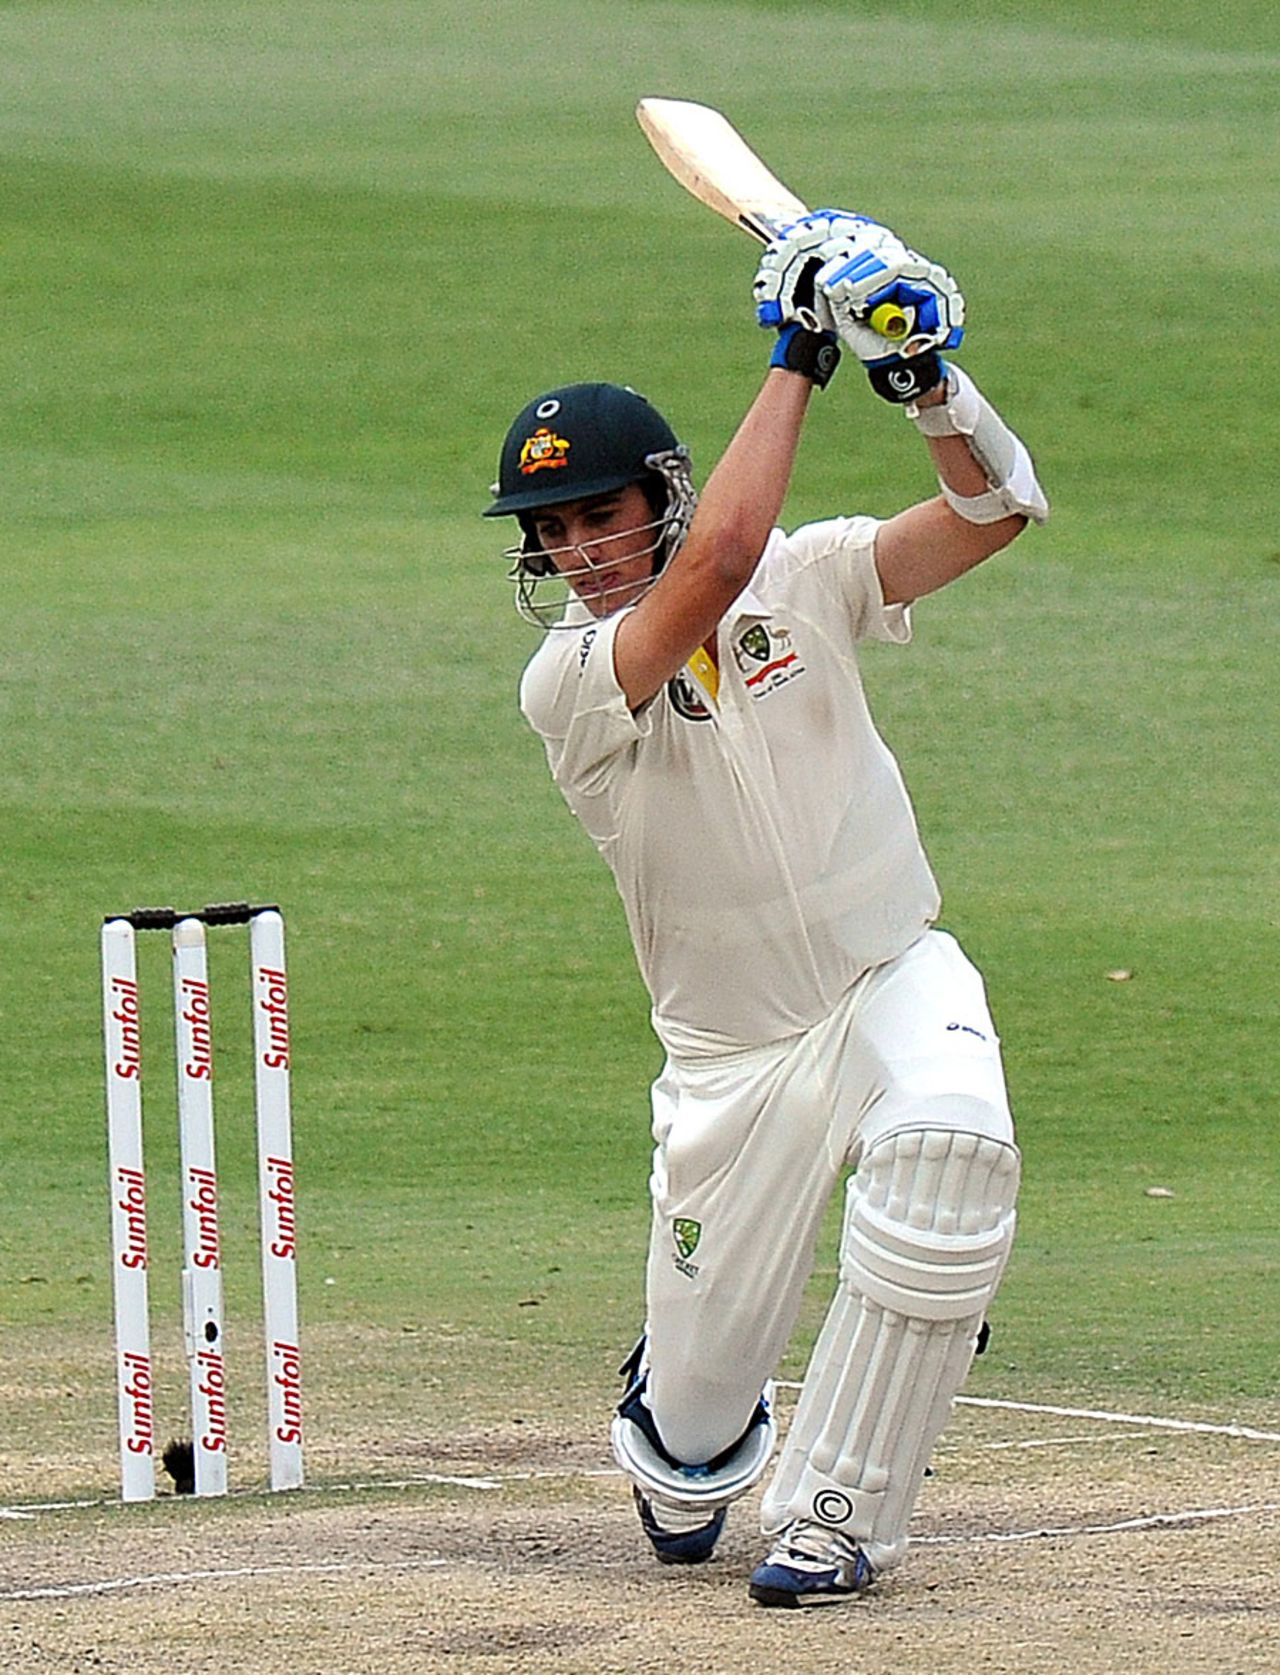 Pat Cummins drives during his cameo, South Africa v Australia, 2nd Test, Johannesburg, 5th day, November 21, 2011